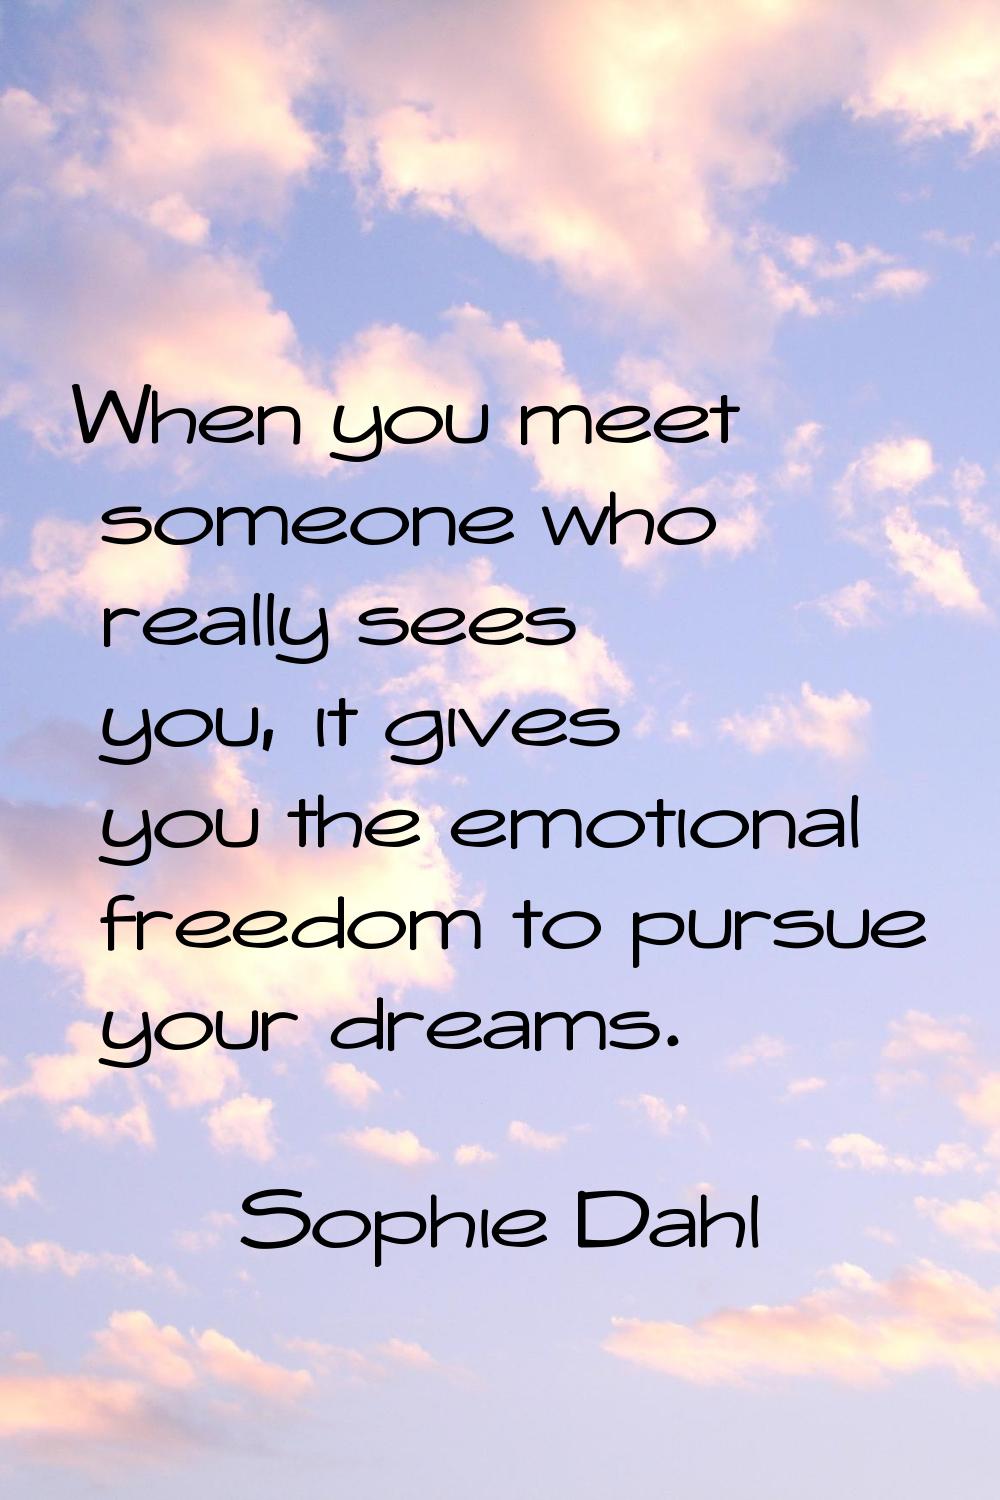 When you meet someone who really sees you, it gives you the emotional freedom to pursue your dreams